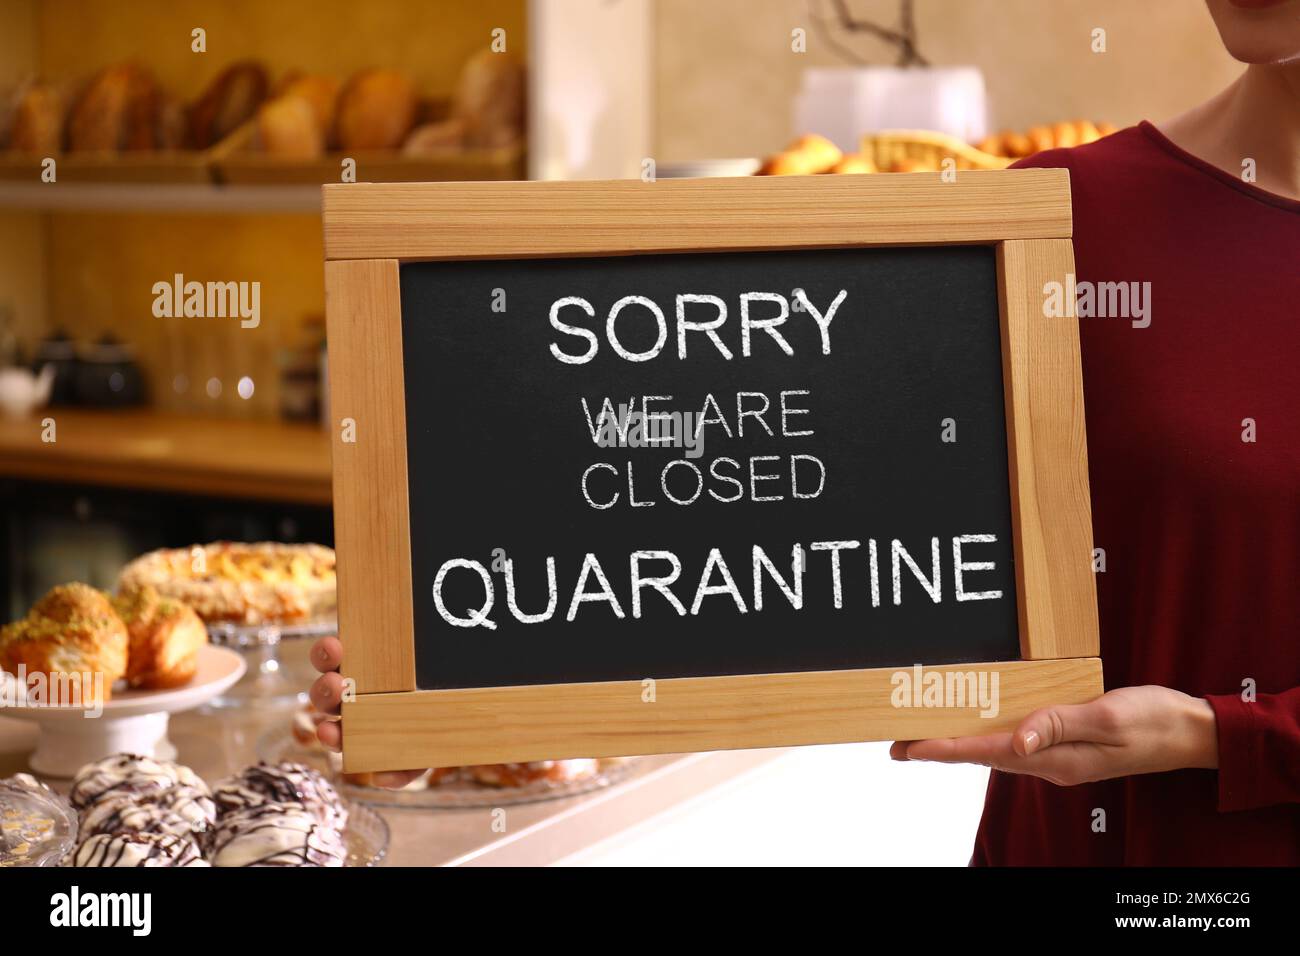 Business owner holding sign with text SORRY WE ARE CLOSED QUARANTINE in bakery, closeup Stock Photo